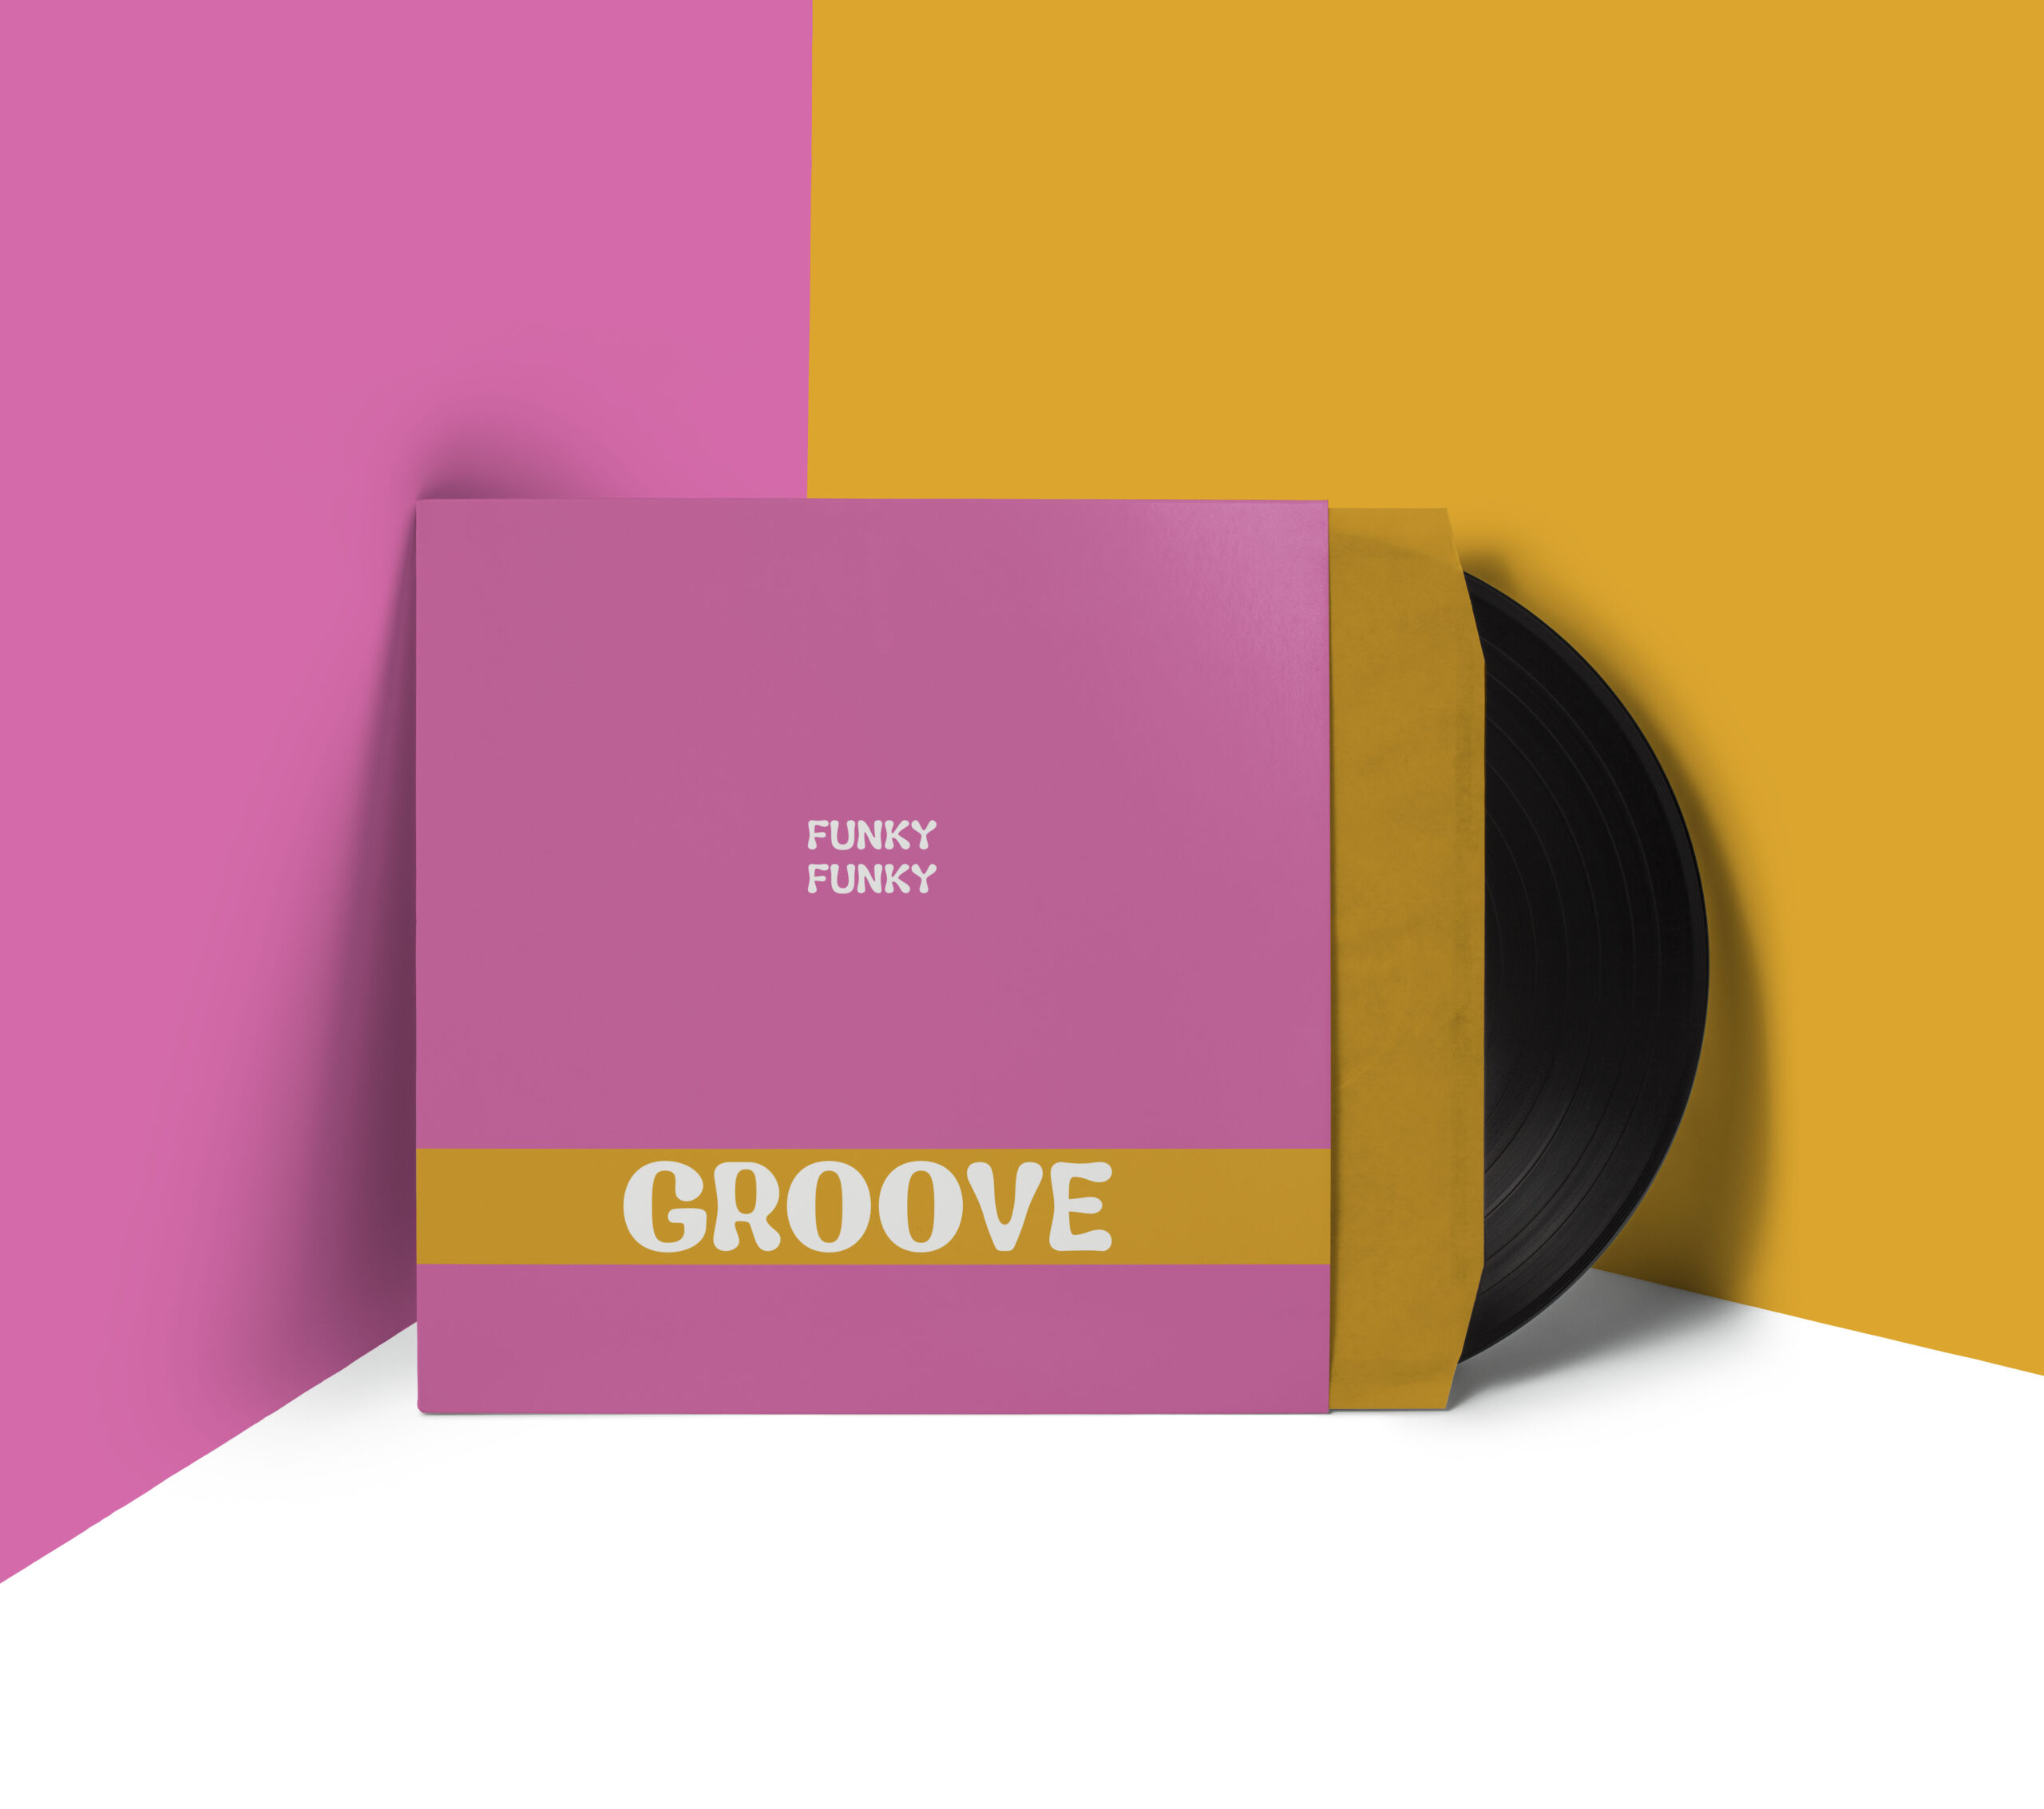 A vinyl record of an album made designed wiith Soobi. The text says a FUNKY FUNKY GROOVE.